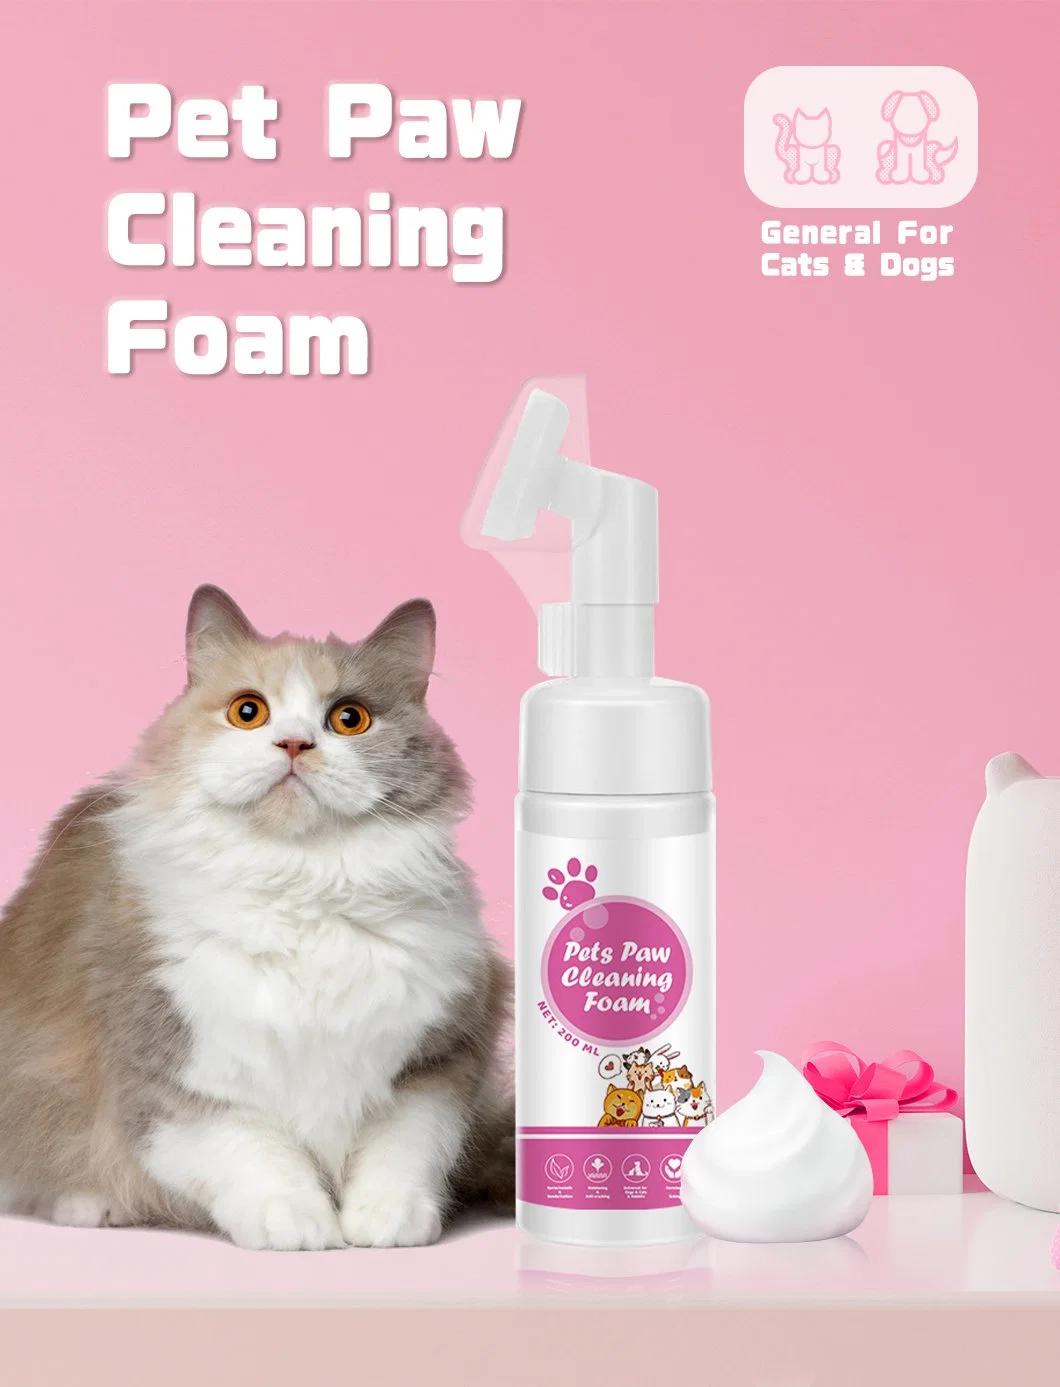 Dog/Cat Wash Free FAW Cleaning Foam Pet Foot Care Paw Cleaning Foam Pet Products